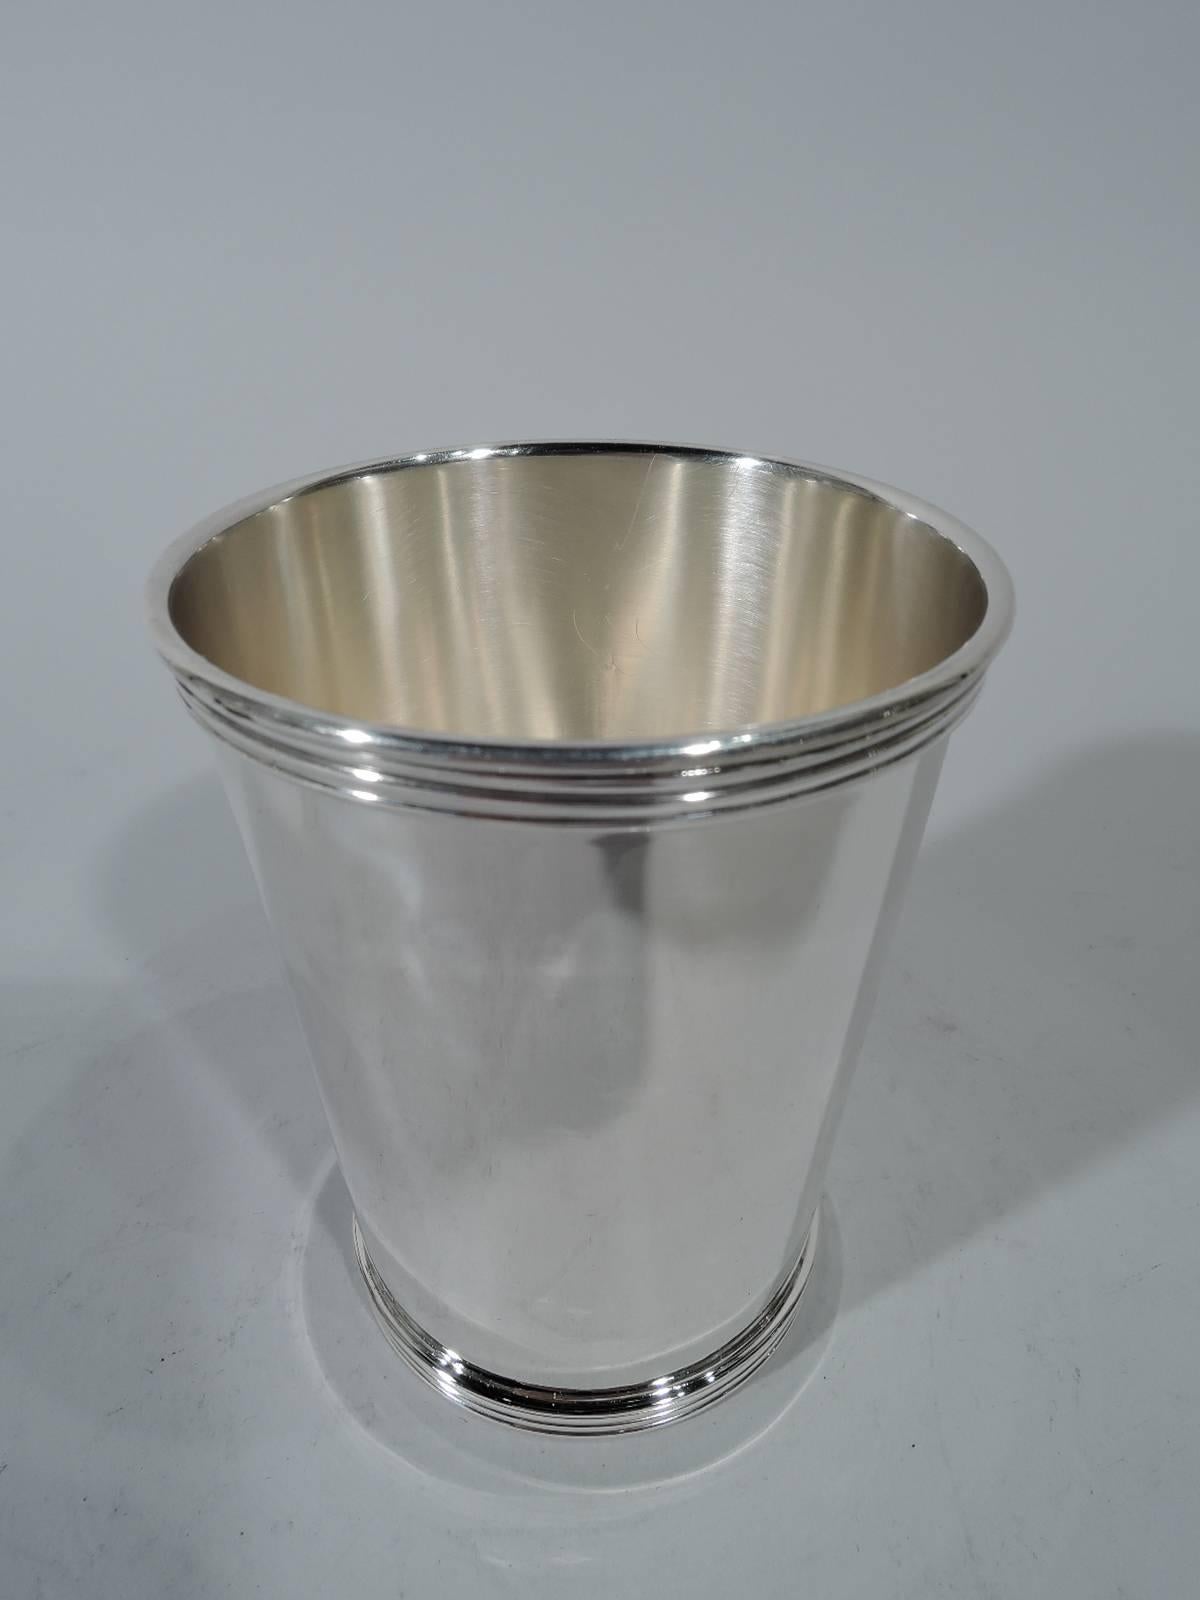 Set of four sterling silver mint juleps. Made by International in Meriden, Conn. Each: Straight and tapering sides, and reeded rim and foot. Hallmark includes no. P699. Total weight: 16.4 troy ounces.